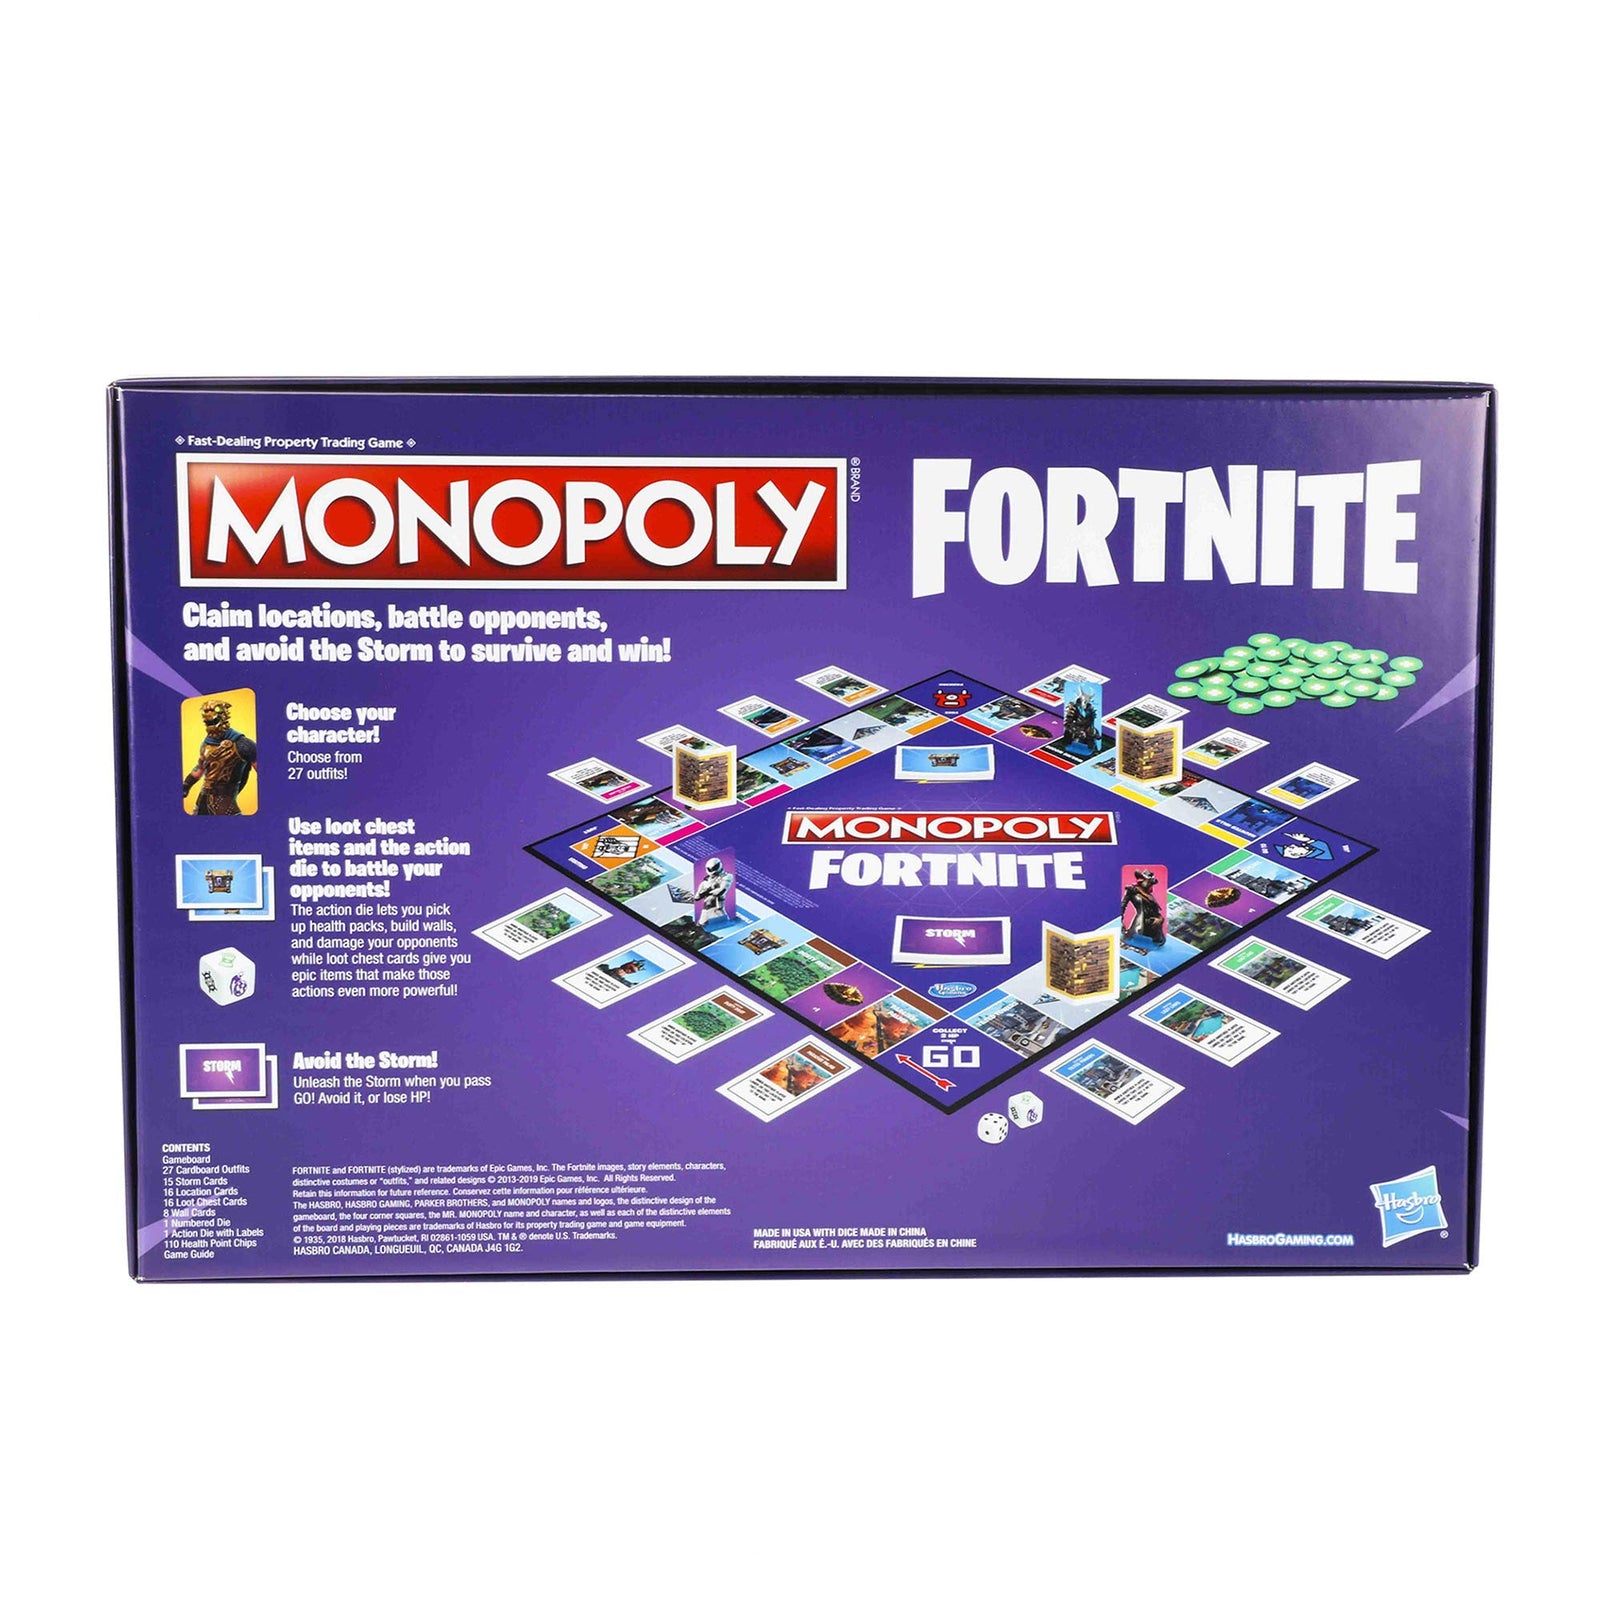 Monopoly: Fortnite Edition Board Game Inspired by Fortnite Video Game Ages 13 & Up